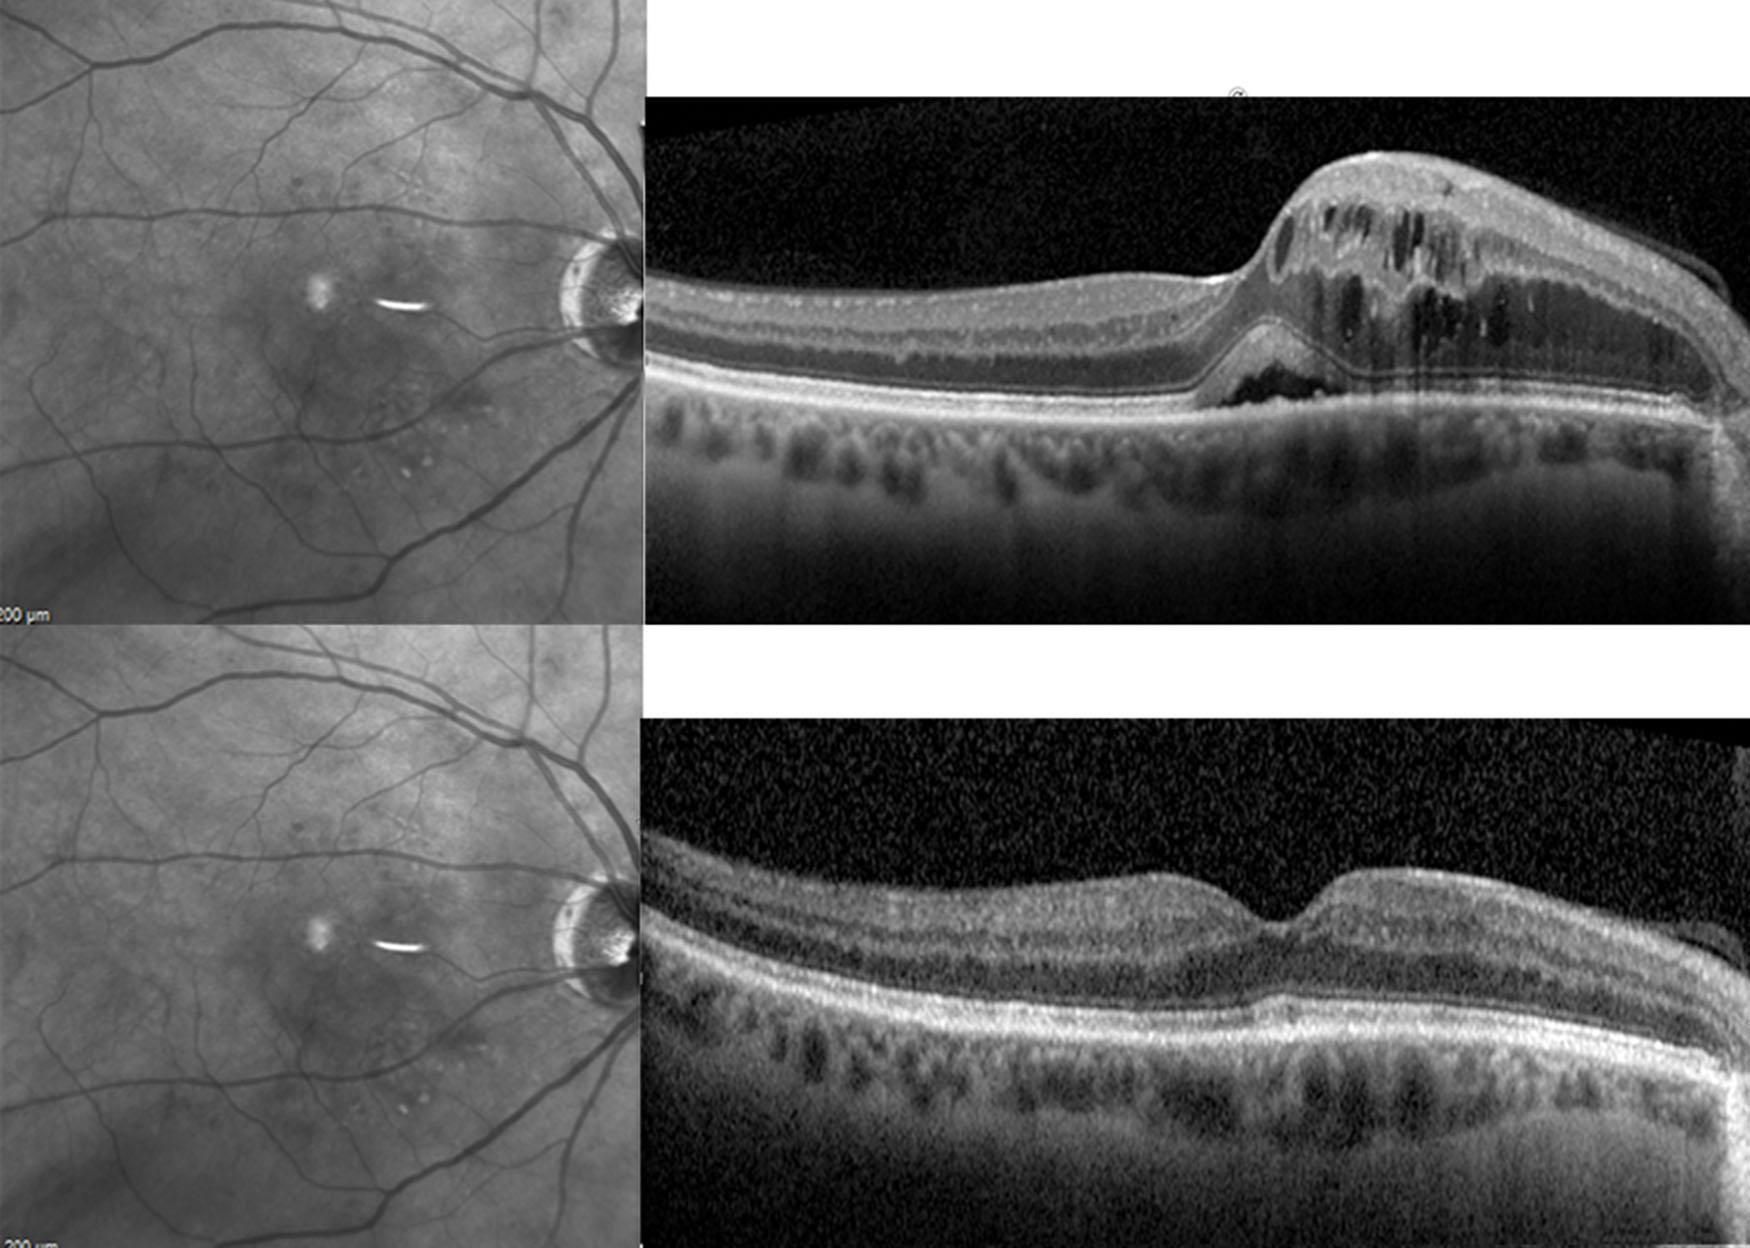 Fig. 39.3, 57 year-old female with poor glycemic control, severe NPDR OU and DME OD. VA was 20/40. SD-OCT (upper right) with infrared image (upper left) showing moderate macular edema with presence of SRF. After 3 injections of anti-VEGF therapy, vision improved to 20/20 and DME resolved. SD-OCT after treatment (bottom right) shows resolution of macular edema and subretinal fluid.